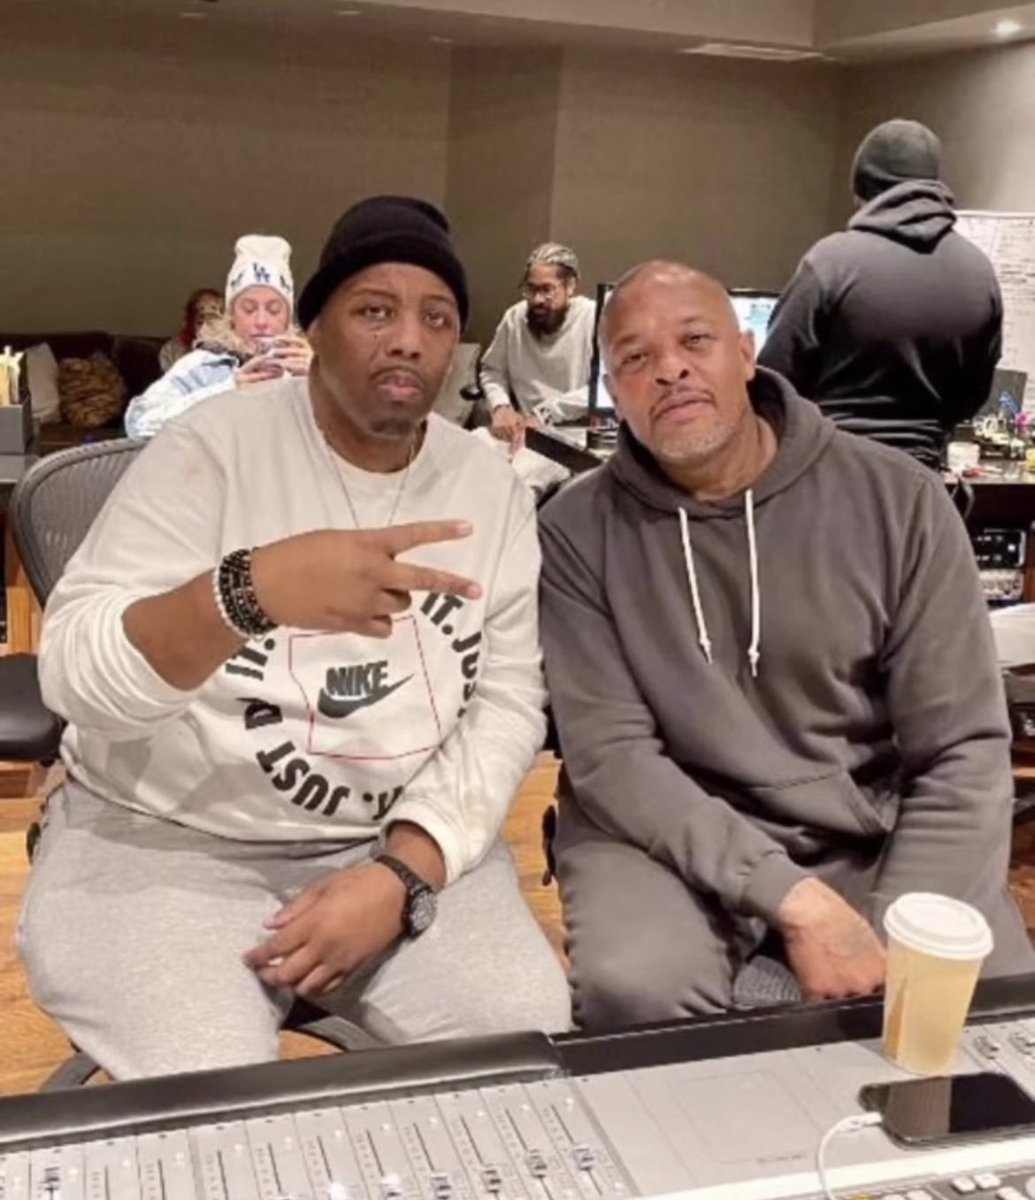 E & D up in the lab 🎙🎙🎵🎵
#ErickSermon #DrDre #HipHop 🔥🔥